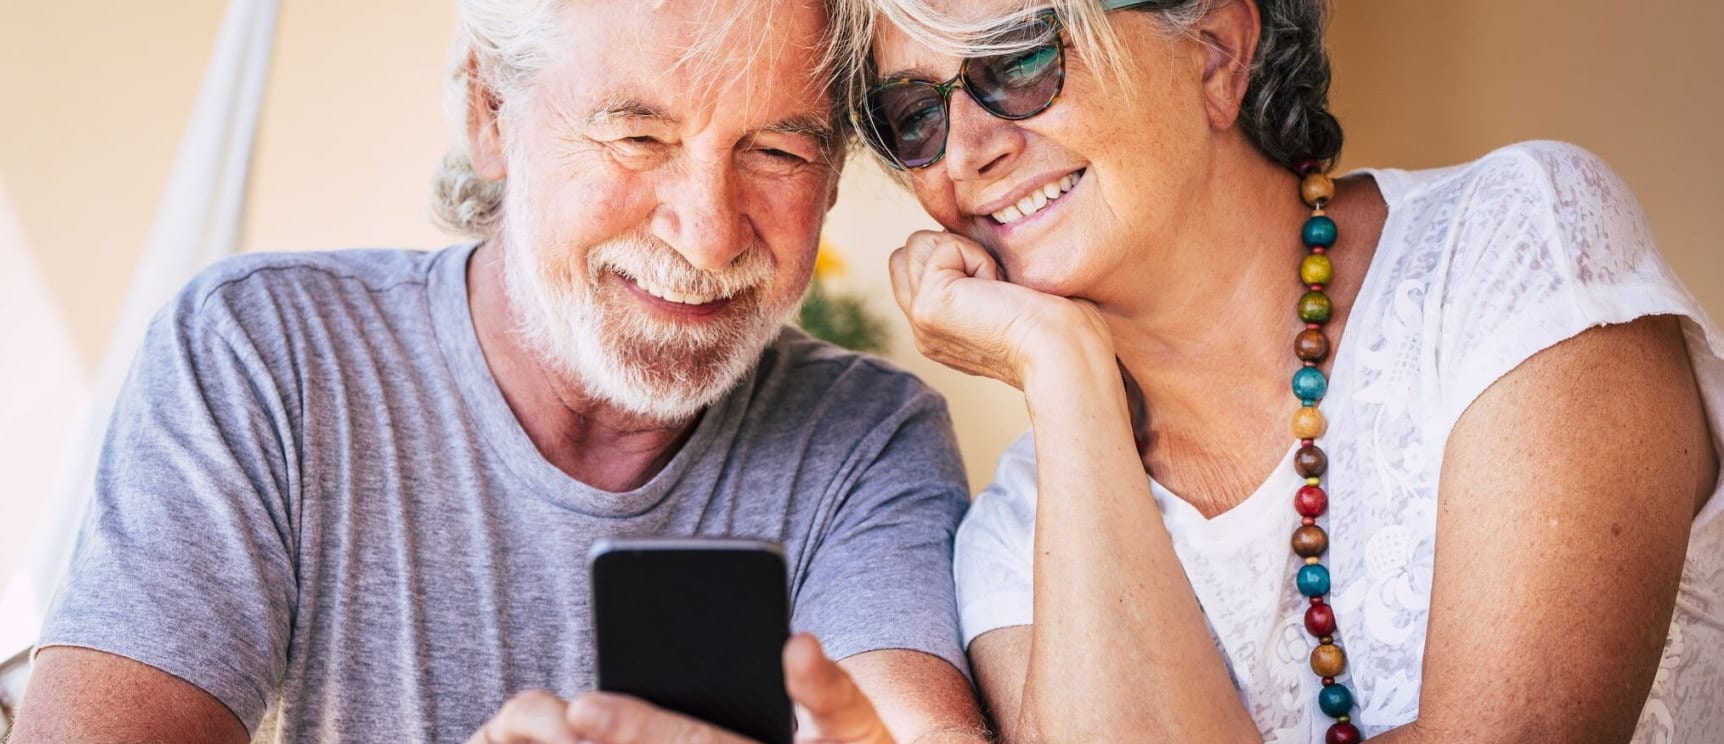 Older couple looking at a phone together